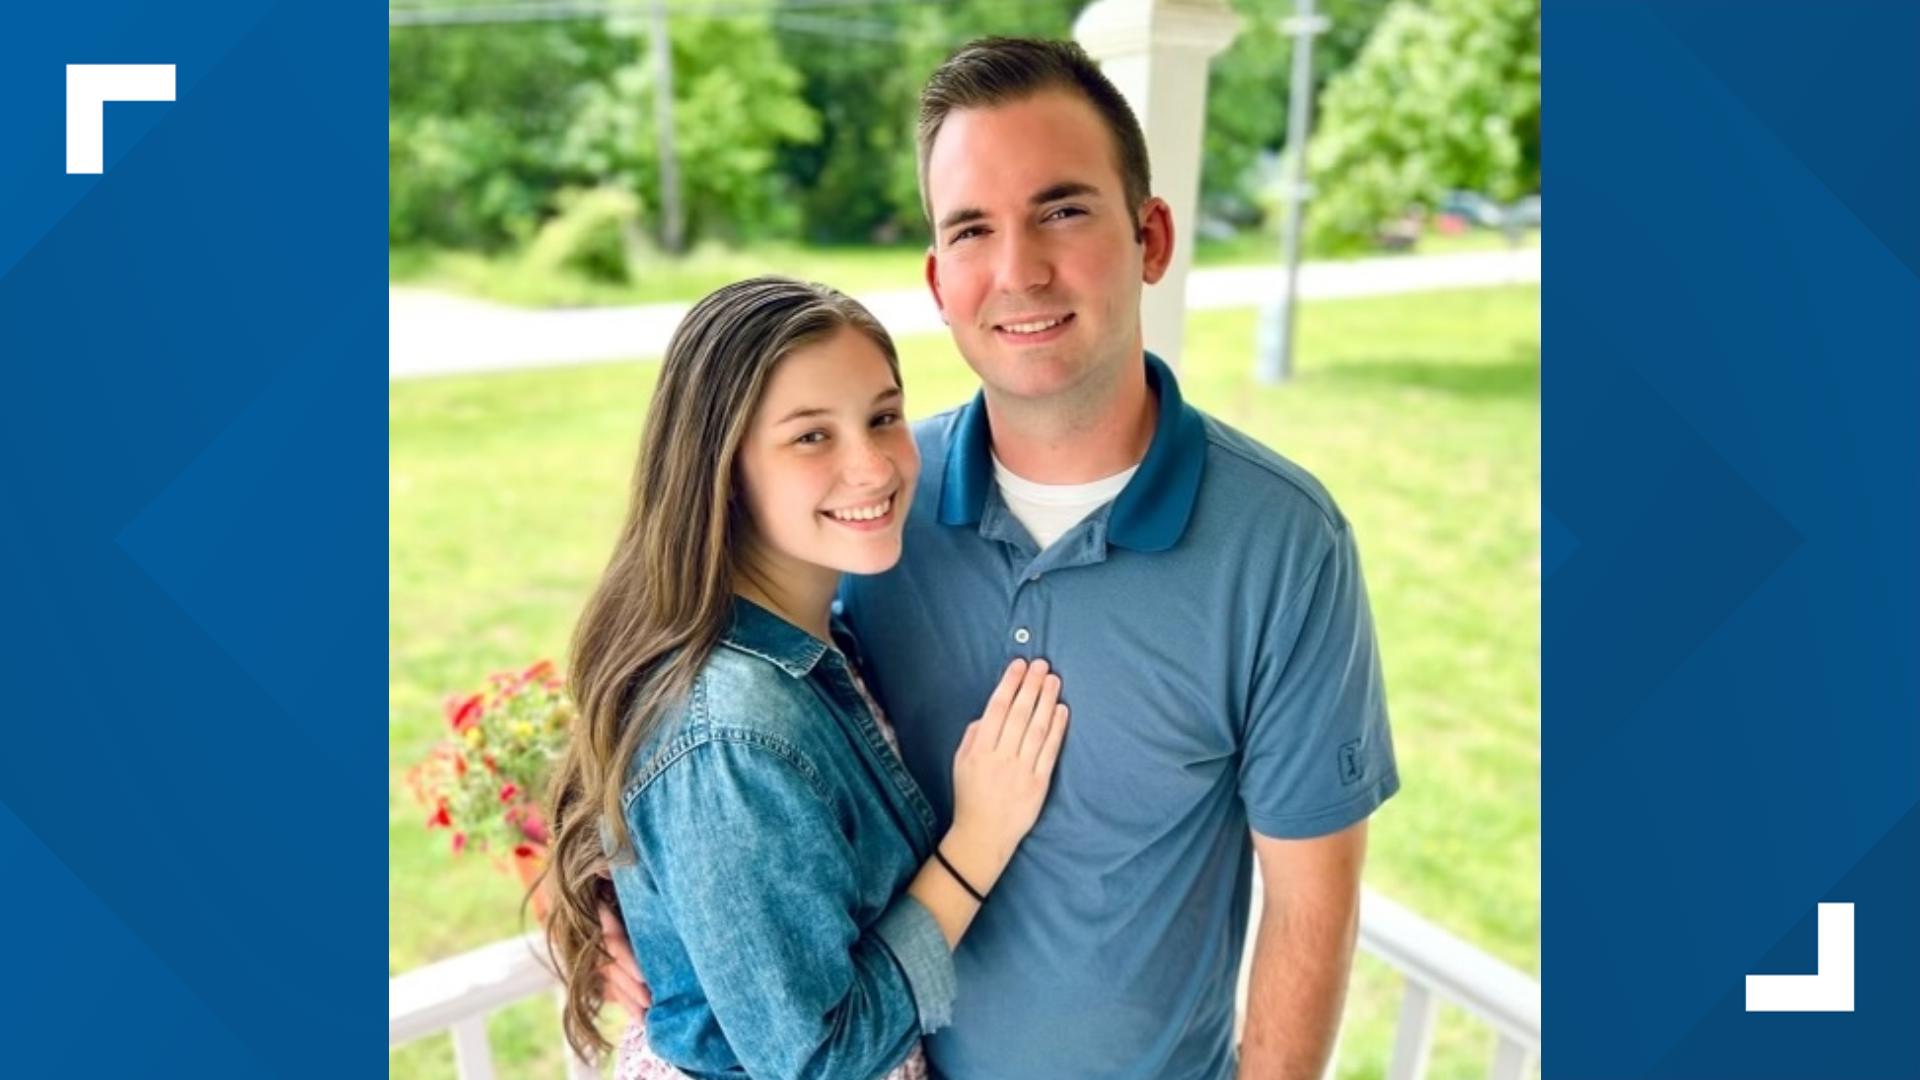 Two of the victims were a young married couple, Davy and Natalie Lloyd, according to a Facebook posting from Natalie Lloyd’s father, Missouri state Rep. Ben Baker.